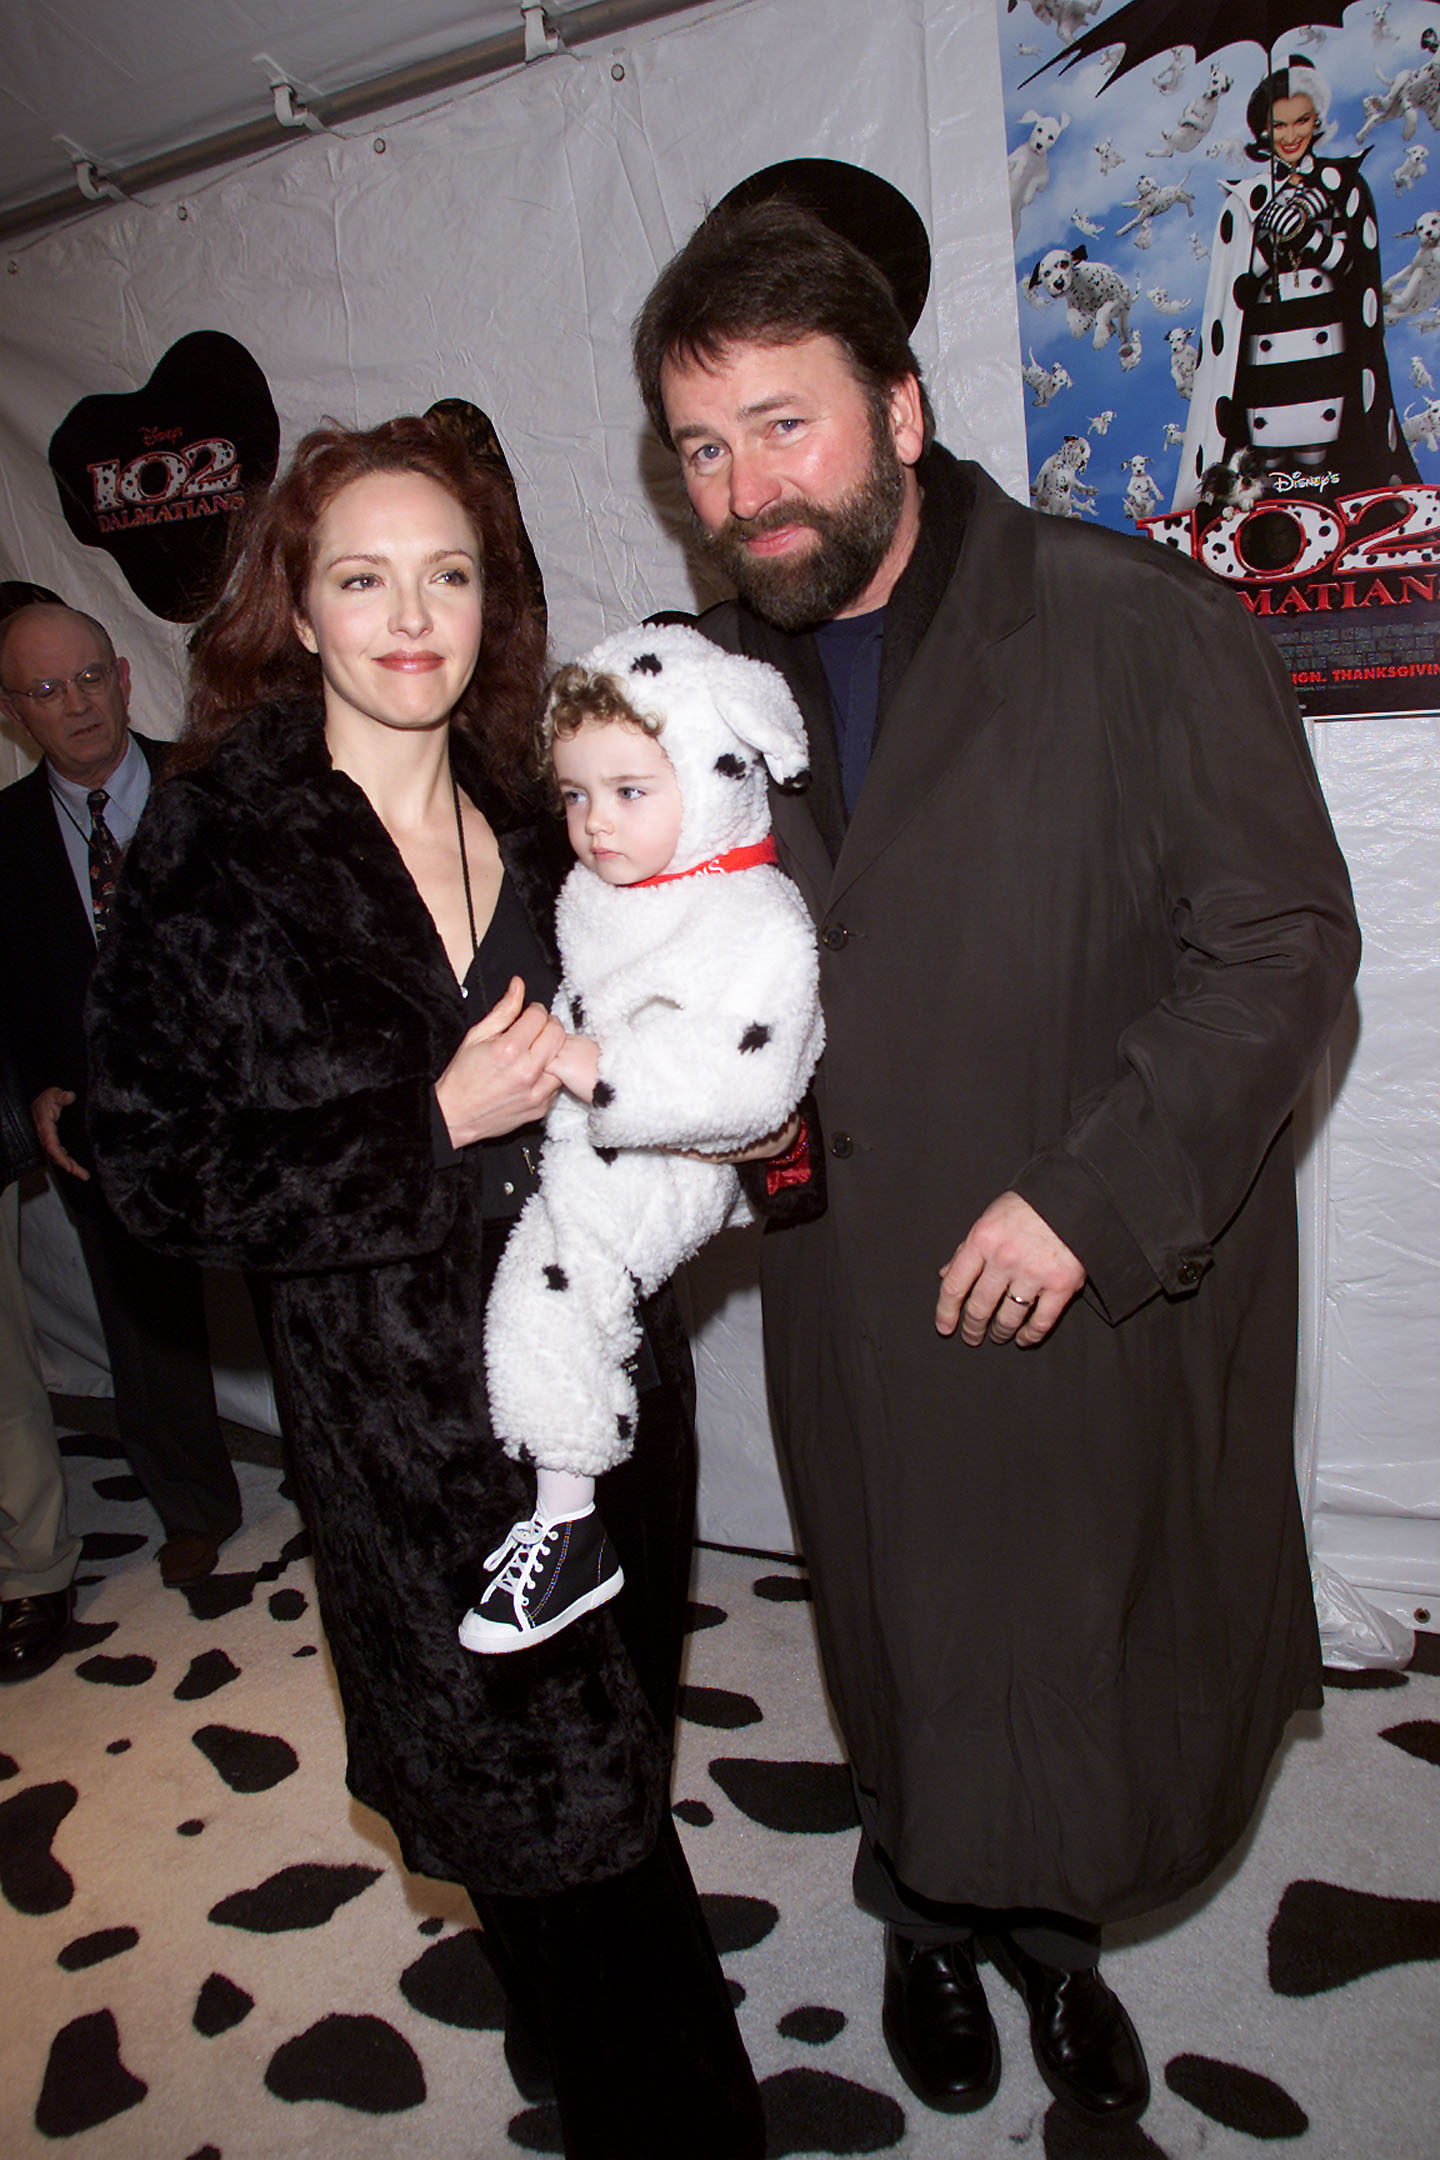 Amy Yasbeck, Stella Ritter, and John Ritter at the world premiere of "102 Dalmatians" in New York City on December 13, 2000 | Source: Getty Images